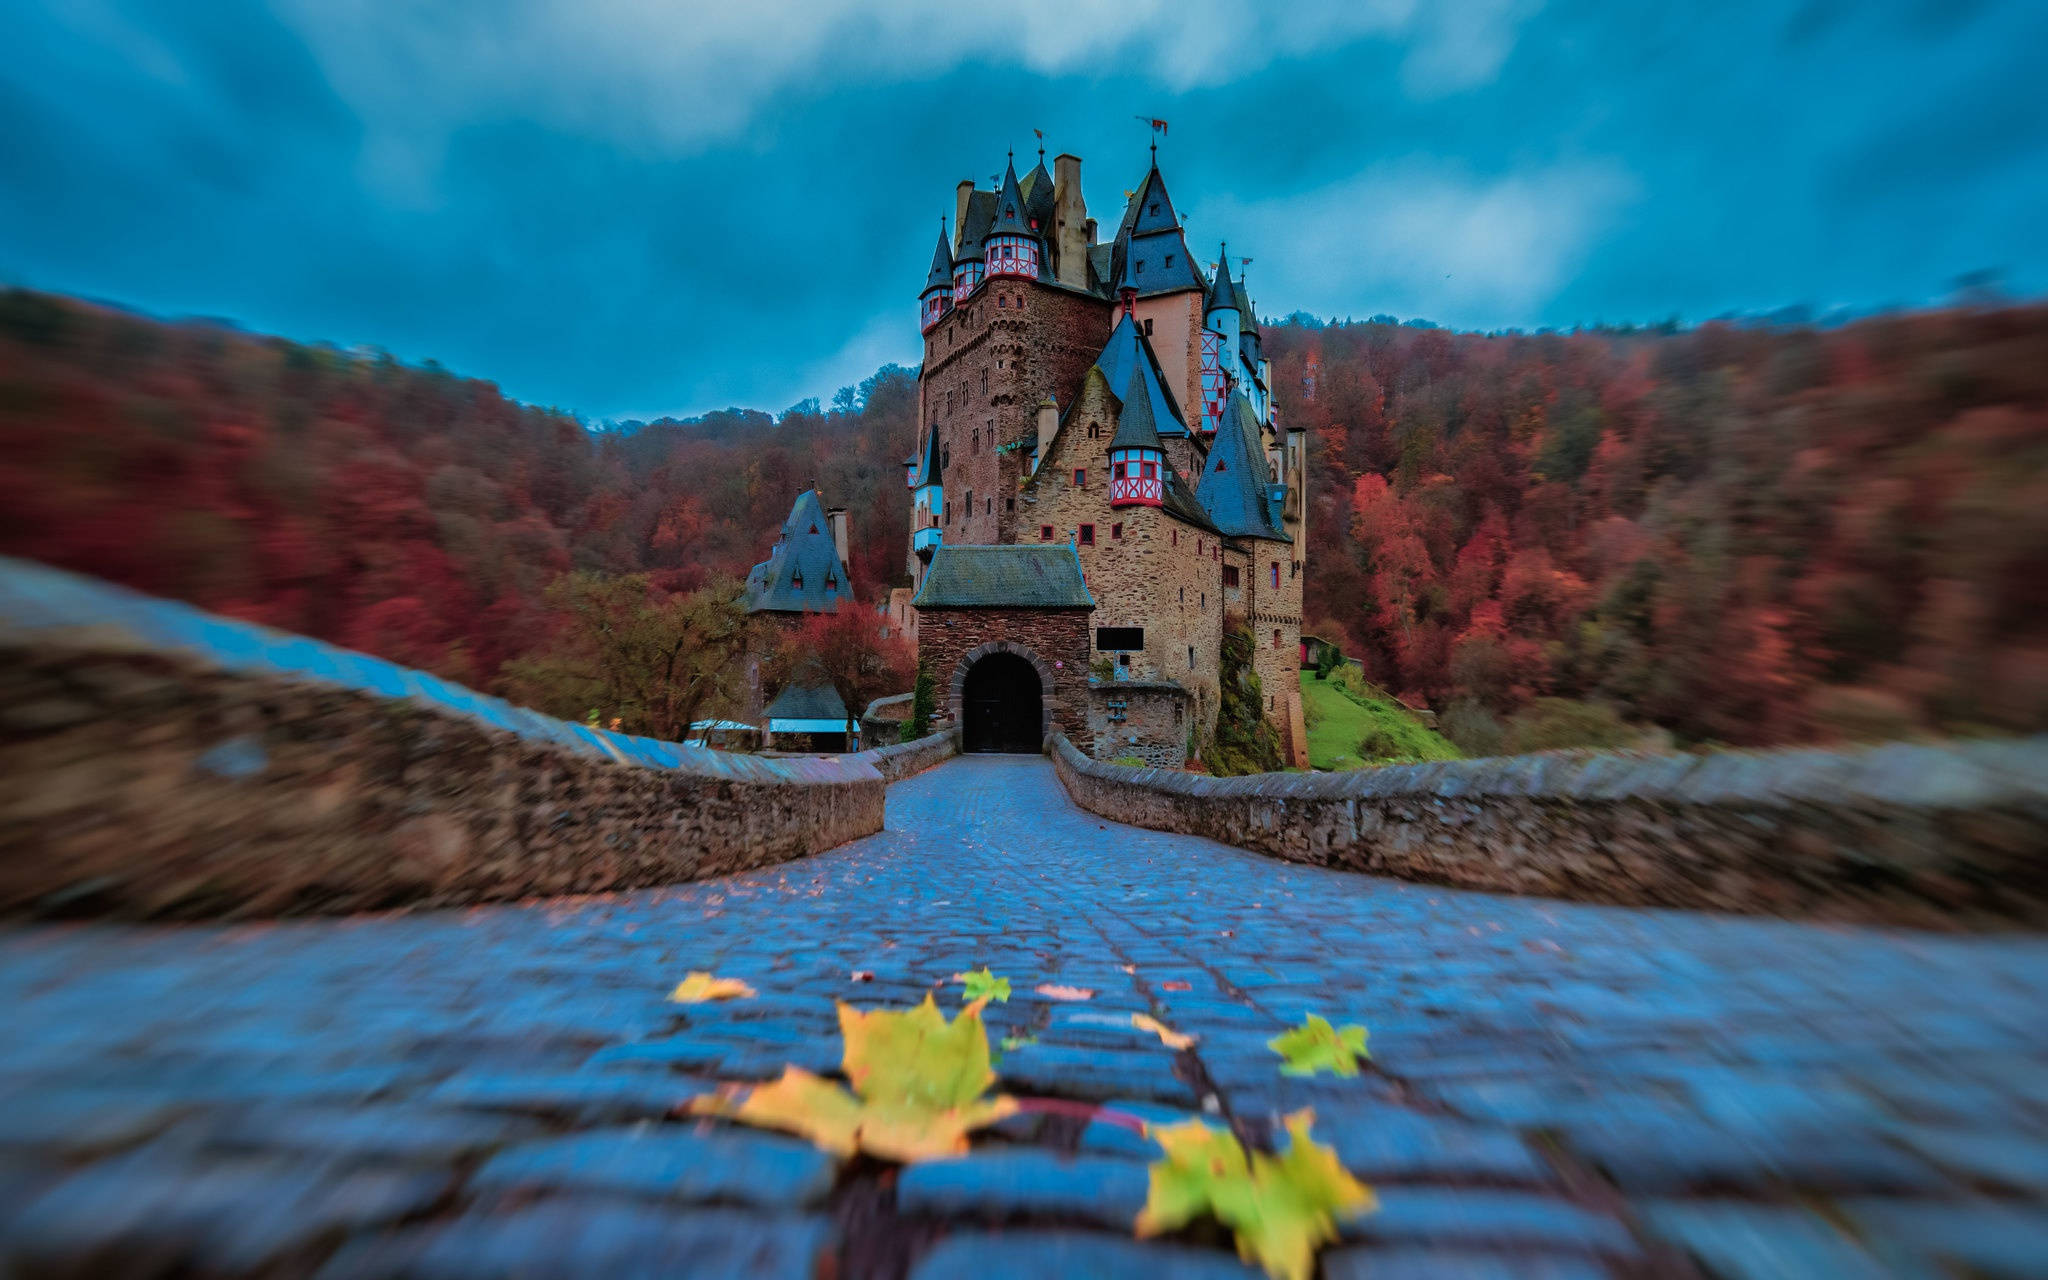 The cobblestone road leading to the castle of Eltz